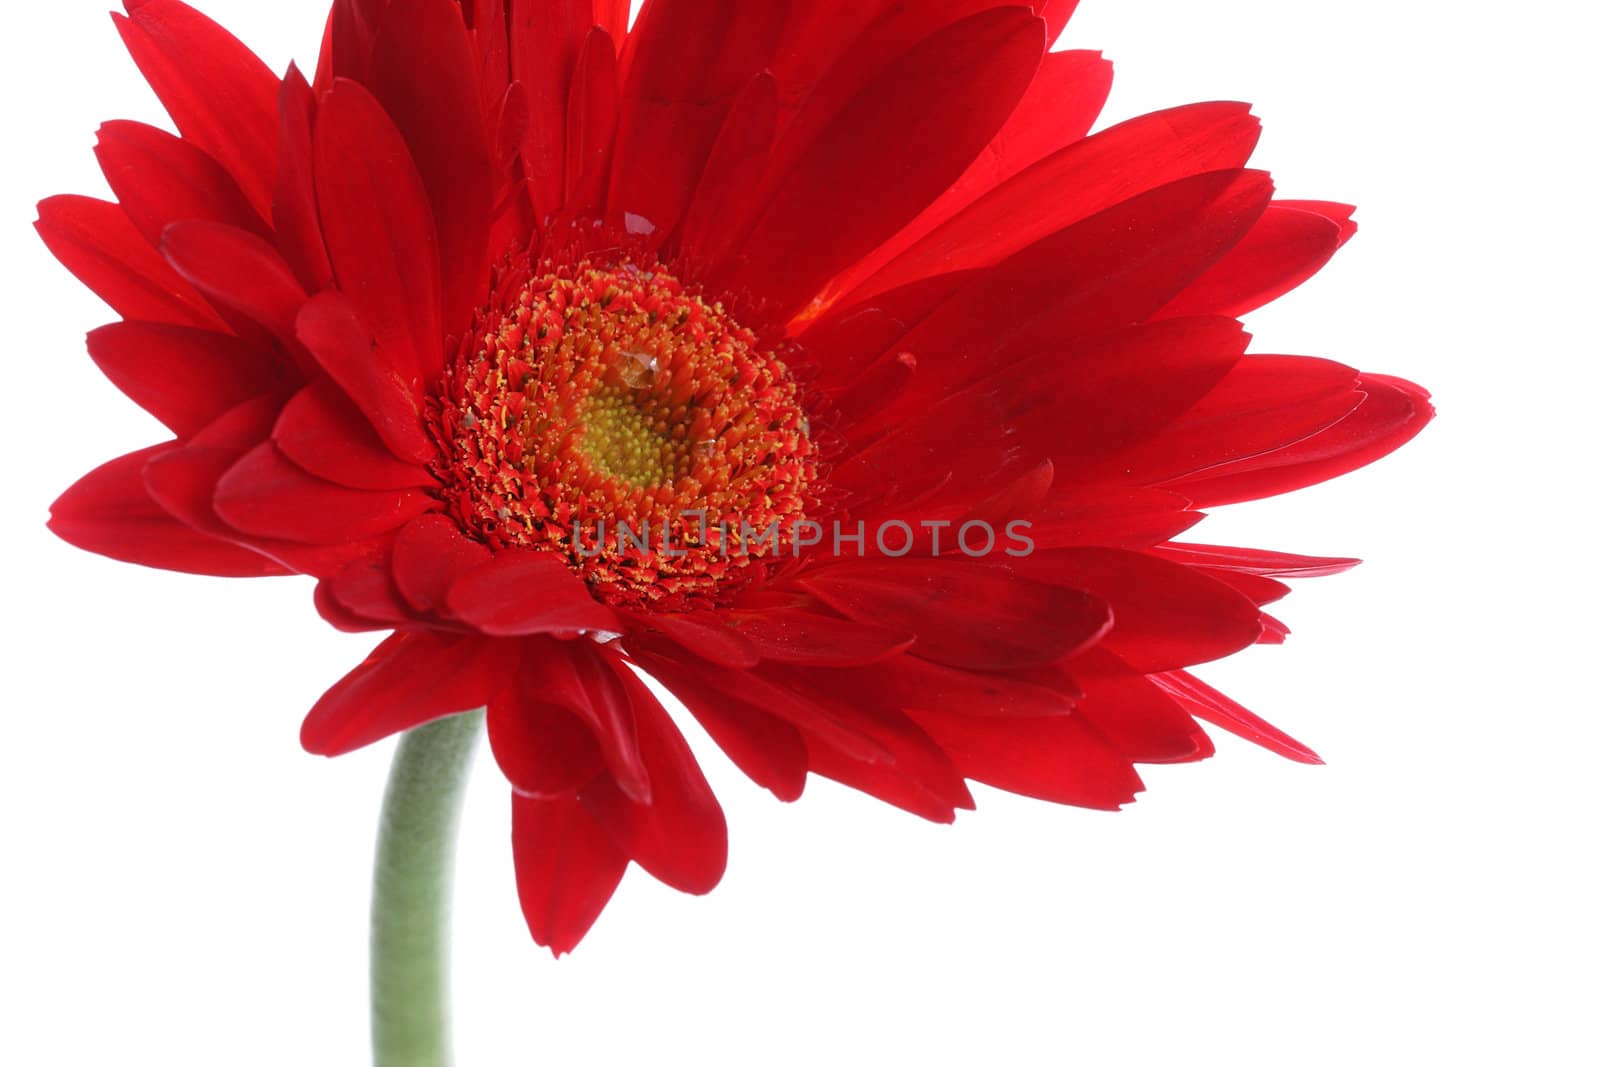 Red gerbera and petals with water drop on white by posterize